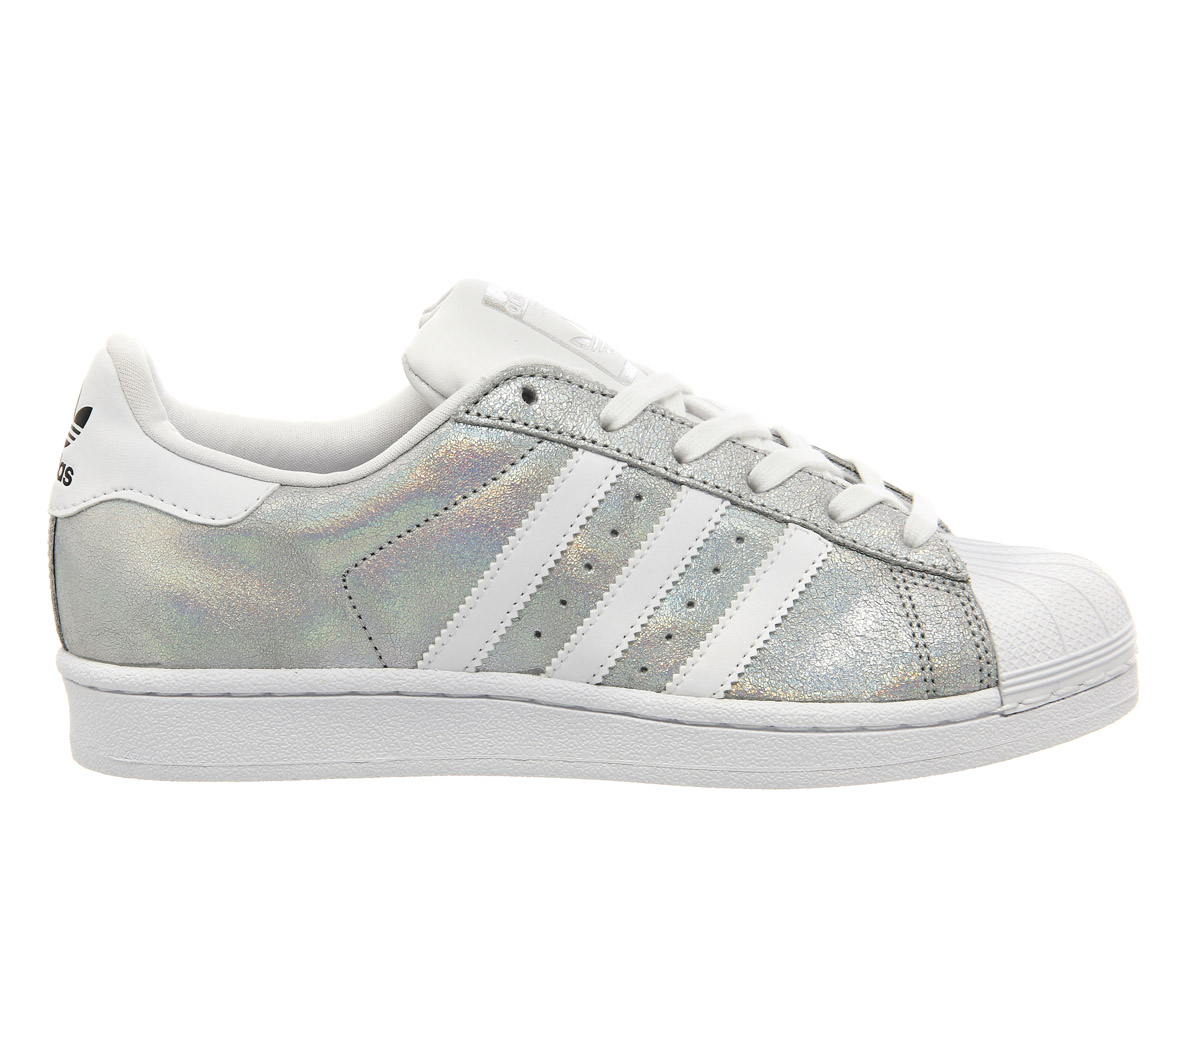 adidas Superstar 2 Holographic Silver W - His trainers